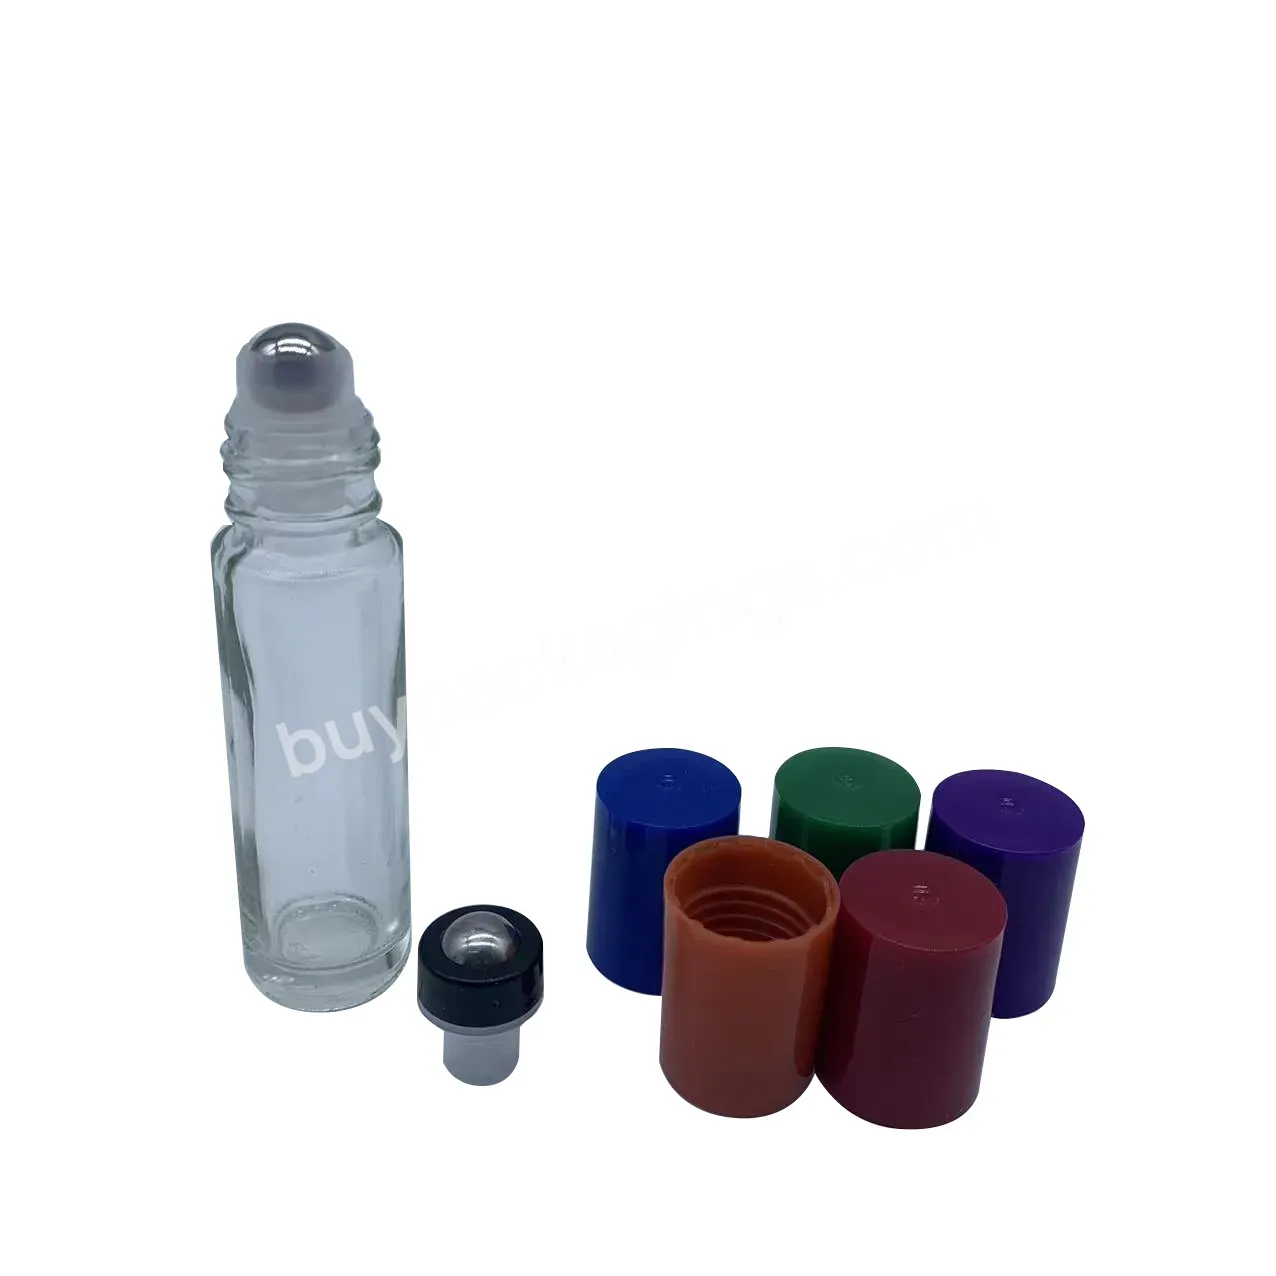 10ml Thick Bottom Empty Clear Glass Lip Essential Oil Roller Bottles With Black Rim Roller And Colorful Plastic Pp Cap - Buy 10ml Thick Glass Essential Oil Roll On Bottle,Roll On Glass Bottle With Black Rim Metal Roller,Glass Bottles With Cap For Ess